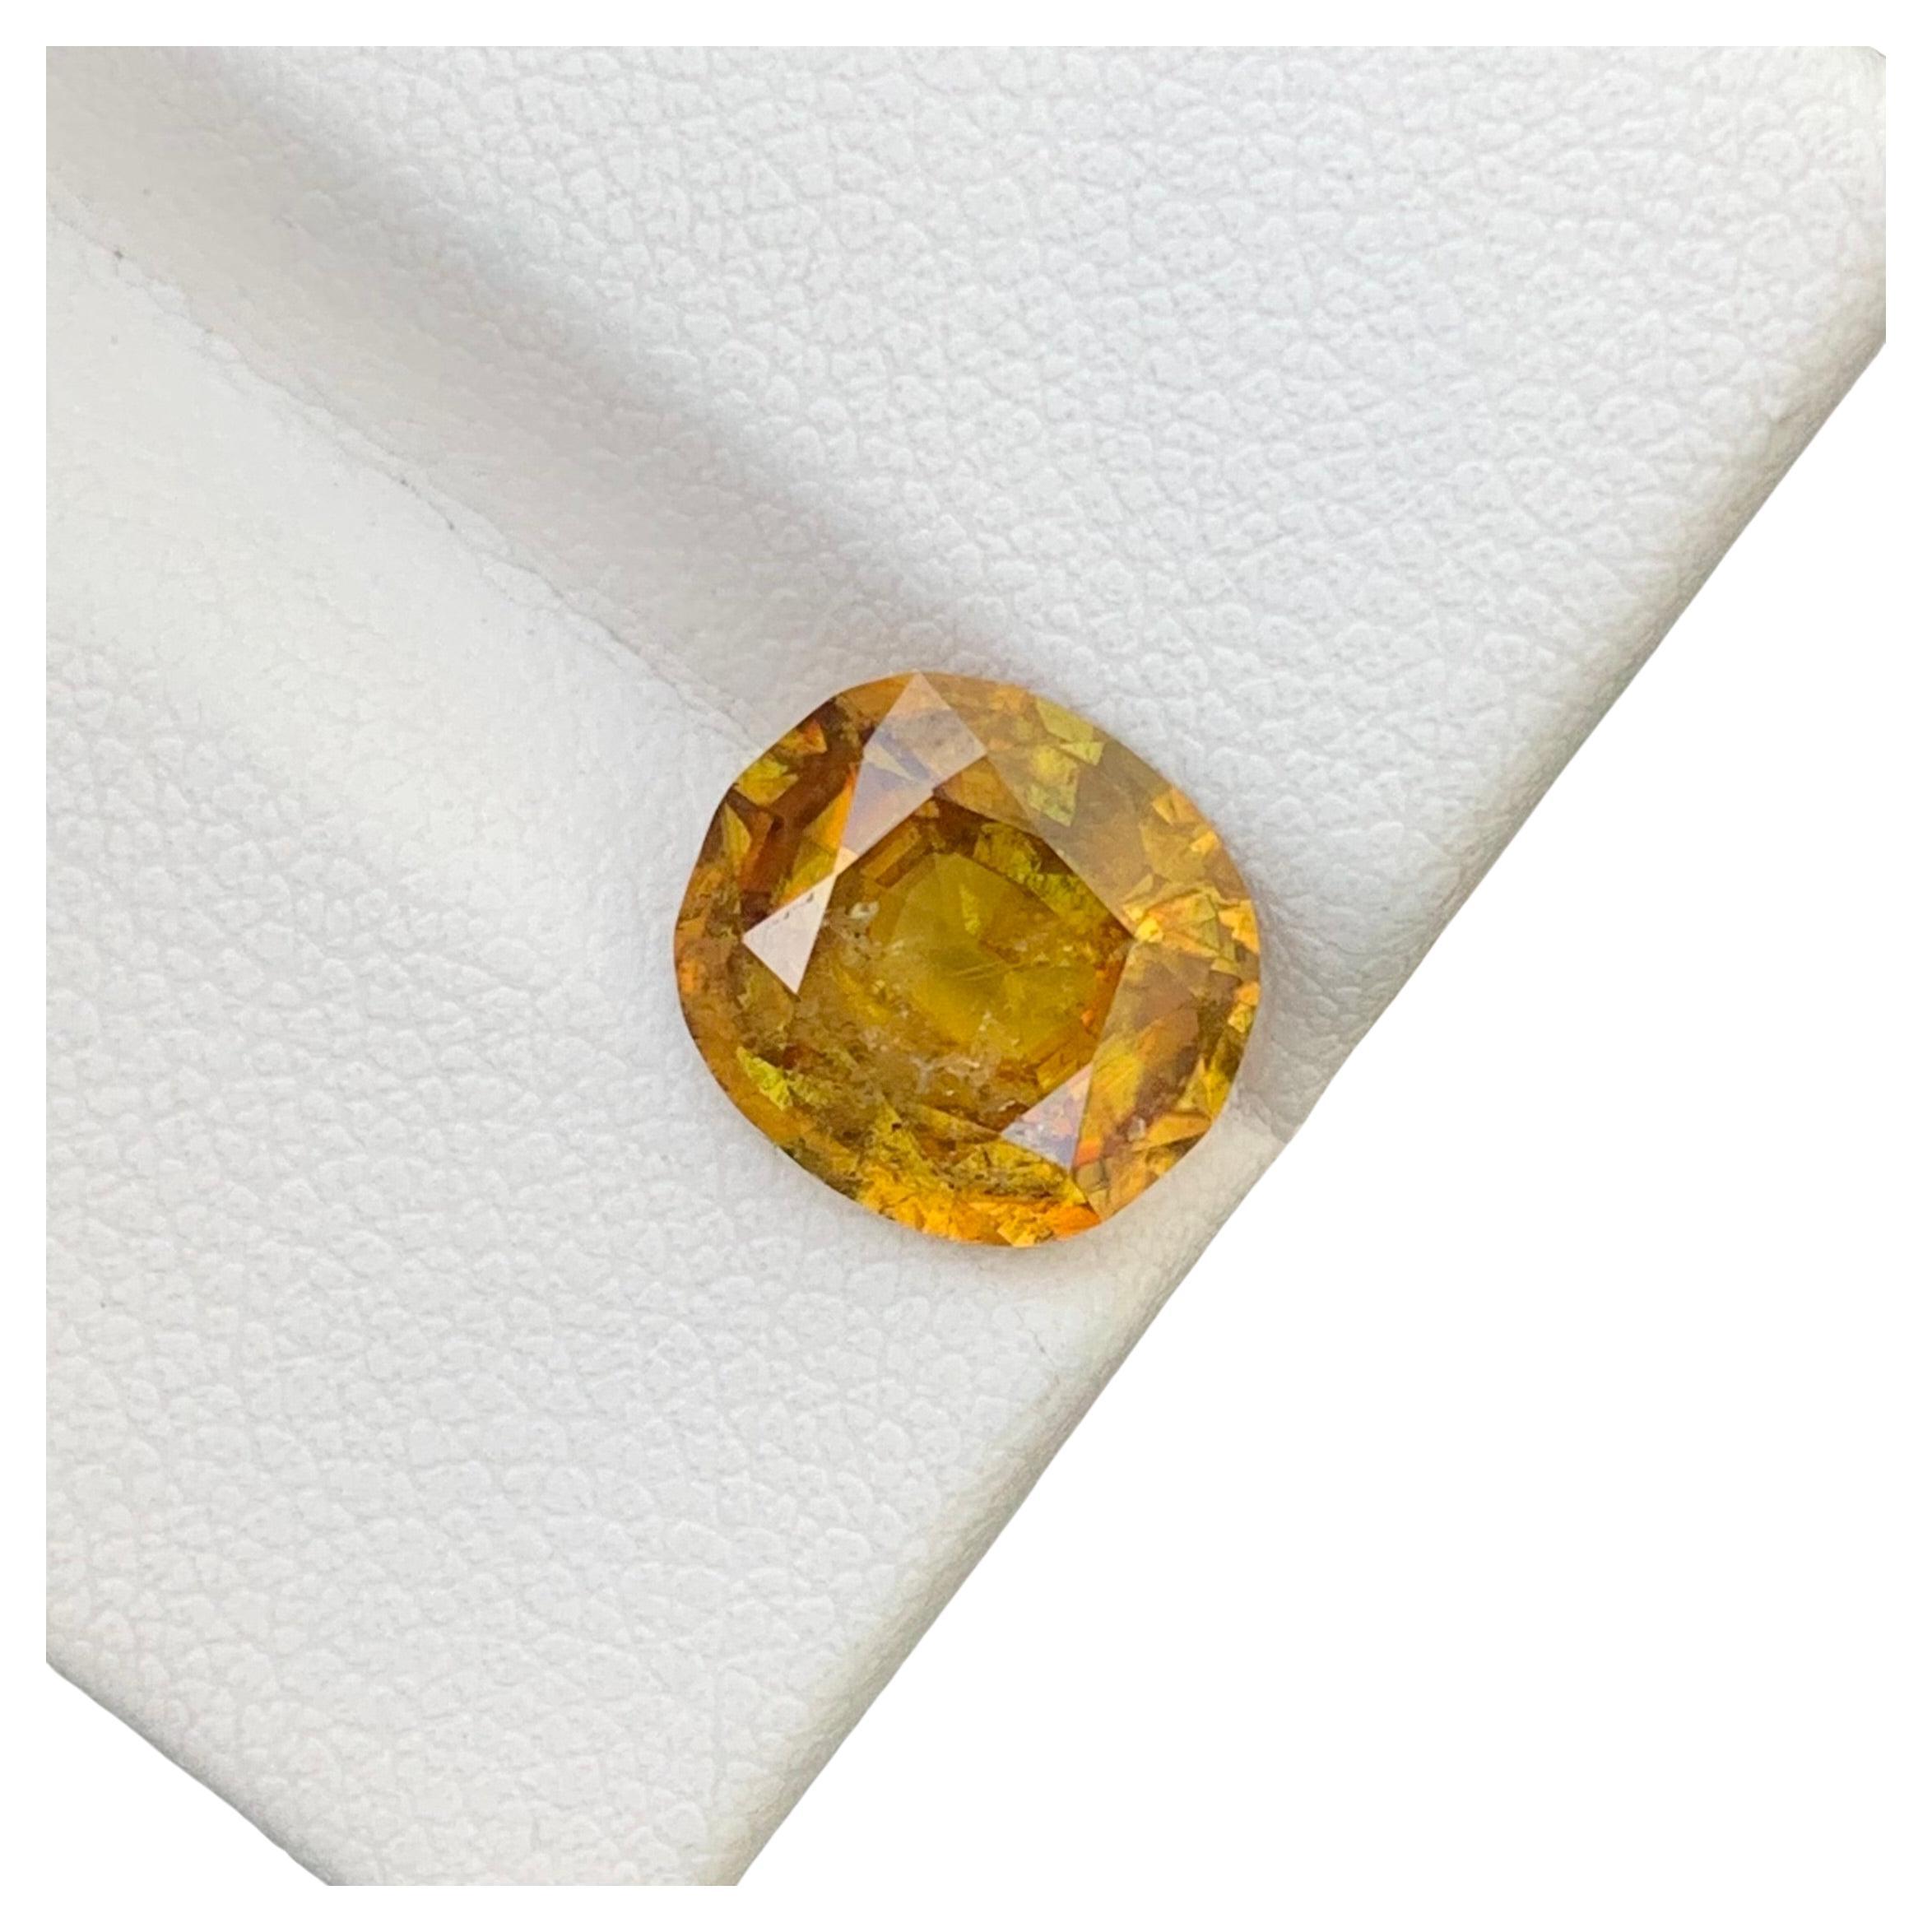 Loose Sphene
Weight: 3.90 Carats 
Dimension: 10.1x9.1x5.6 Mm
Origin: Warsak Pakistan 
Shape: Oval
Color: Yellow Fire Orange 
Treatment: Non
Certificate: On Demand
Sphene, also known as titanite, is a remarkable and lesser-known gemstone that has